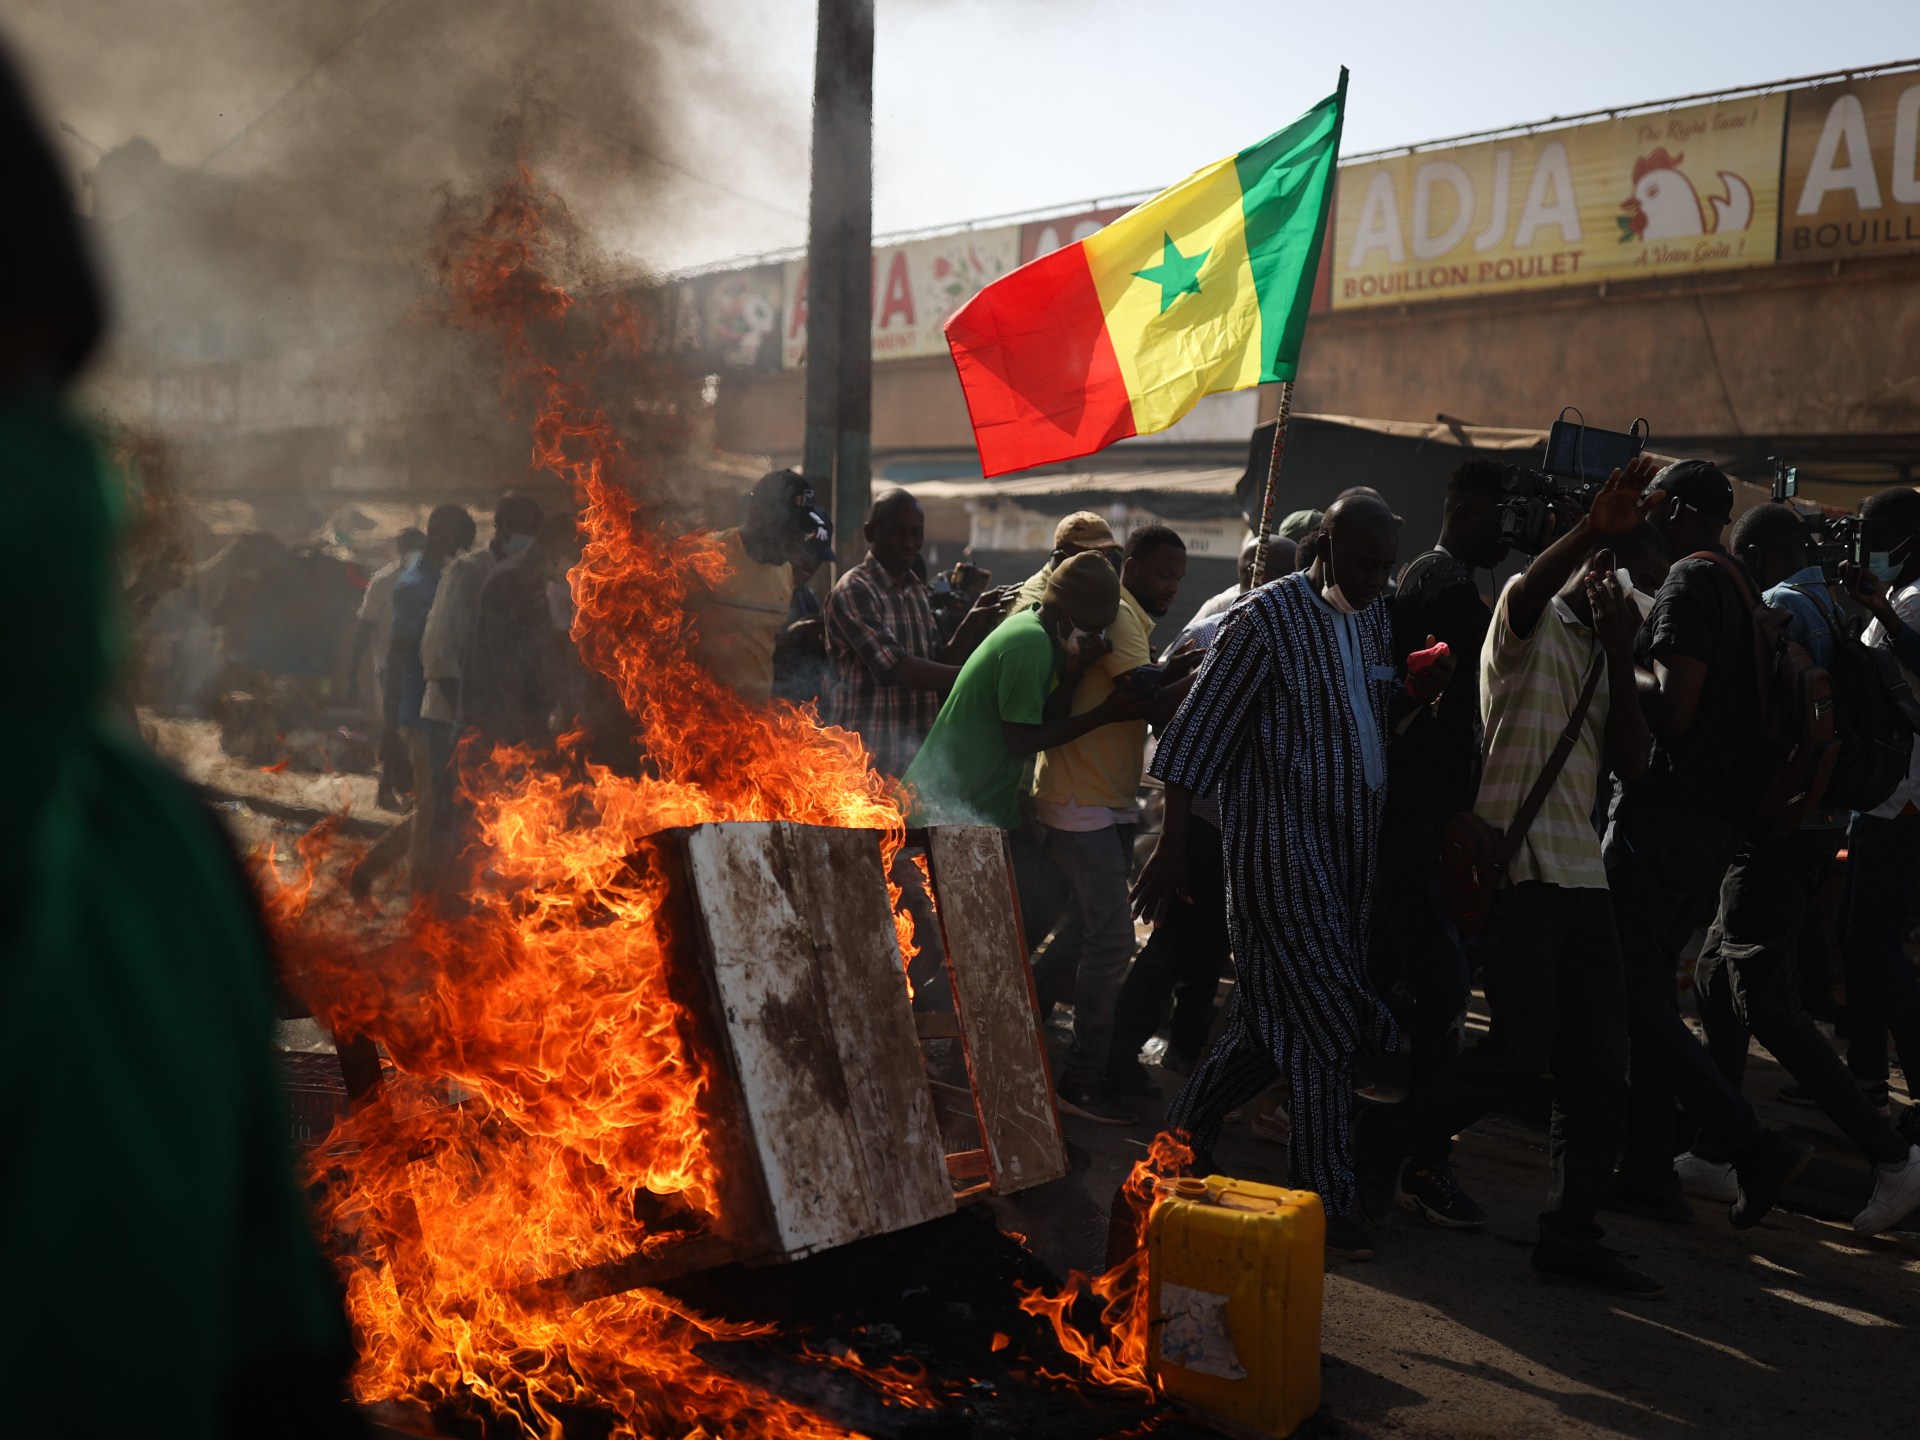 Student killed in Senegal protests over election delay | Elections News